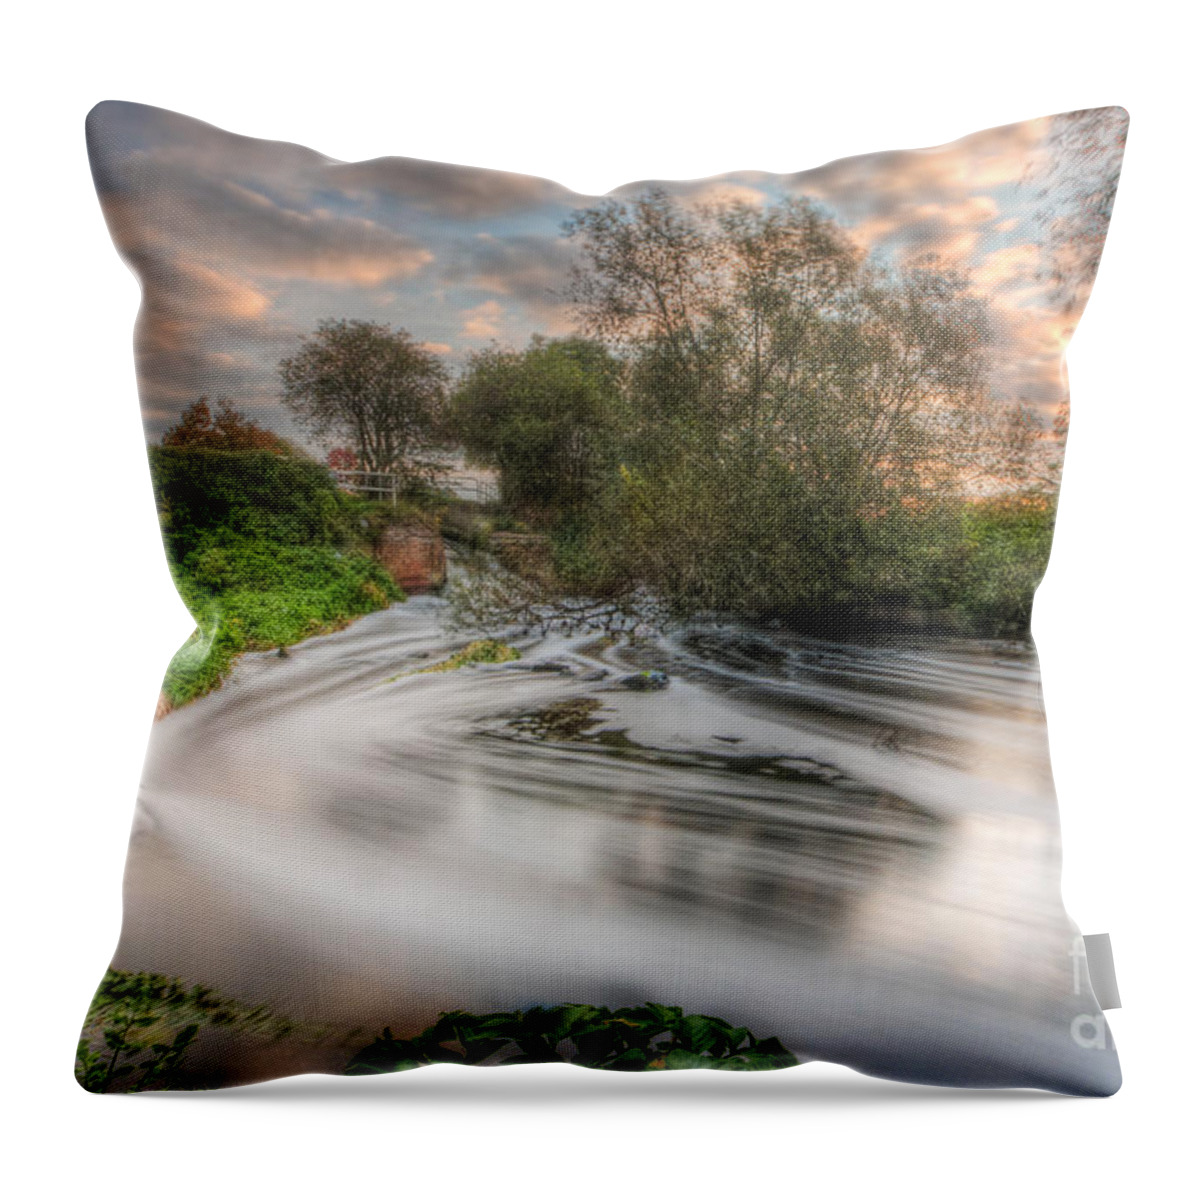 Hdr Throw Pillow featuring the photograph Gush Forth 3.0 by Yhun Suarez